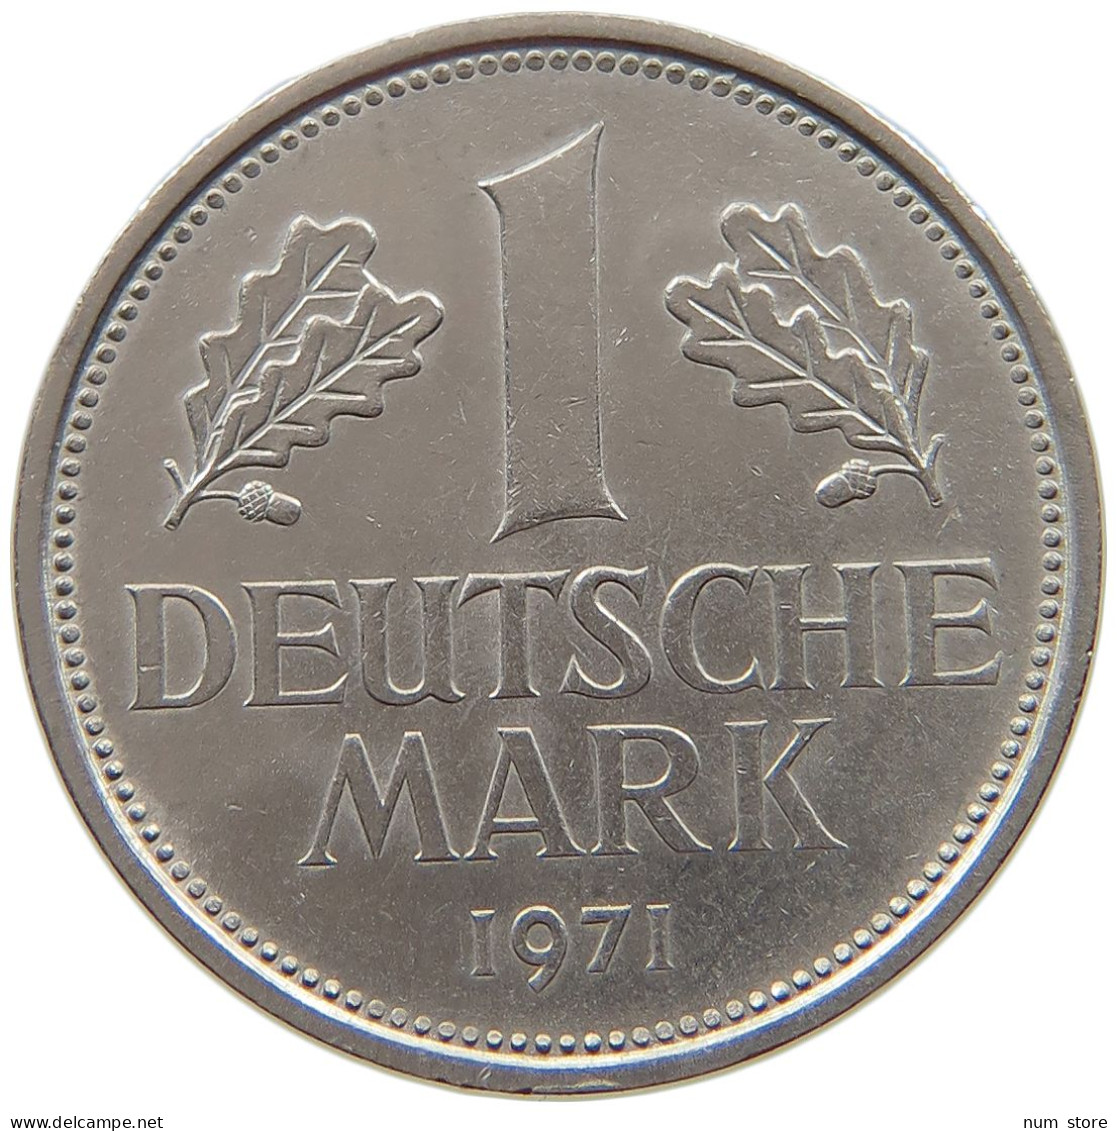 GERMANY WEST 1 MARK 1971 D #a043 0487 - 1 Mark